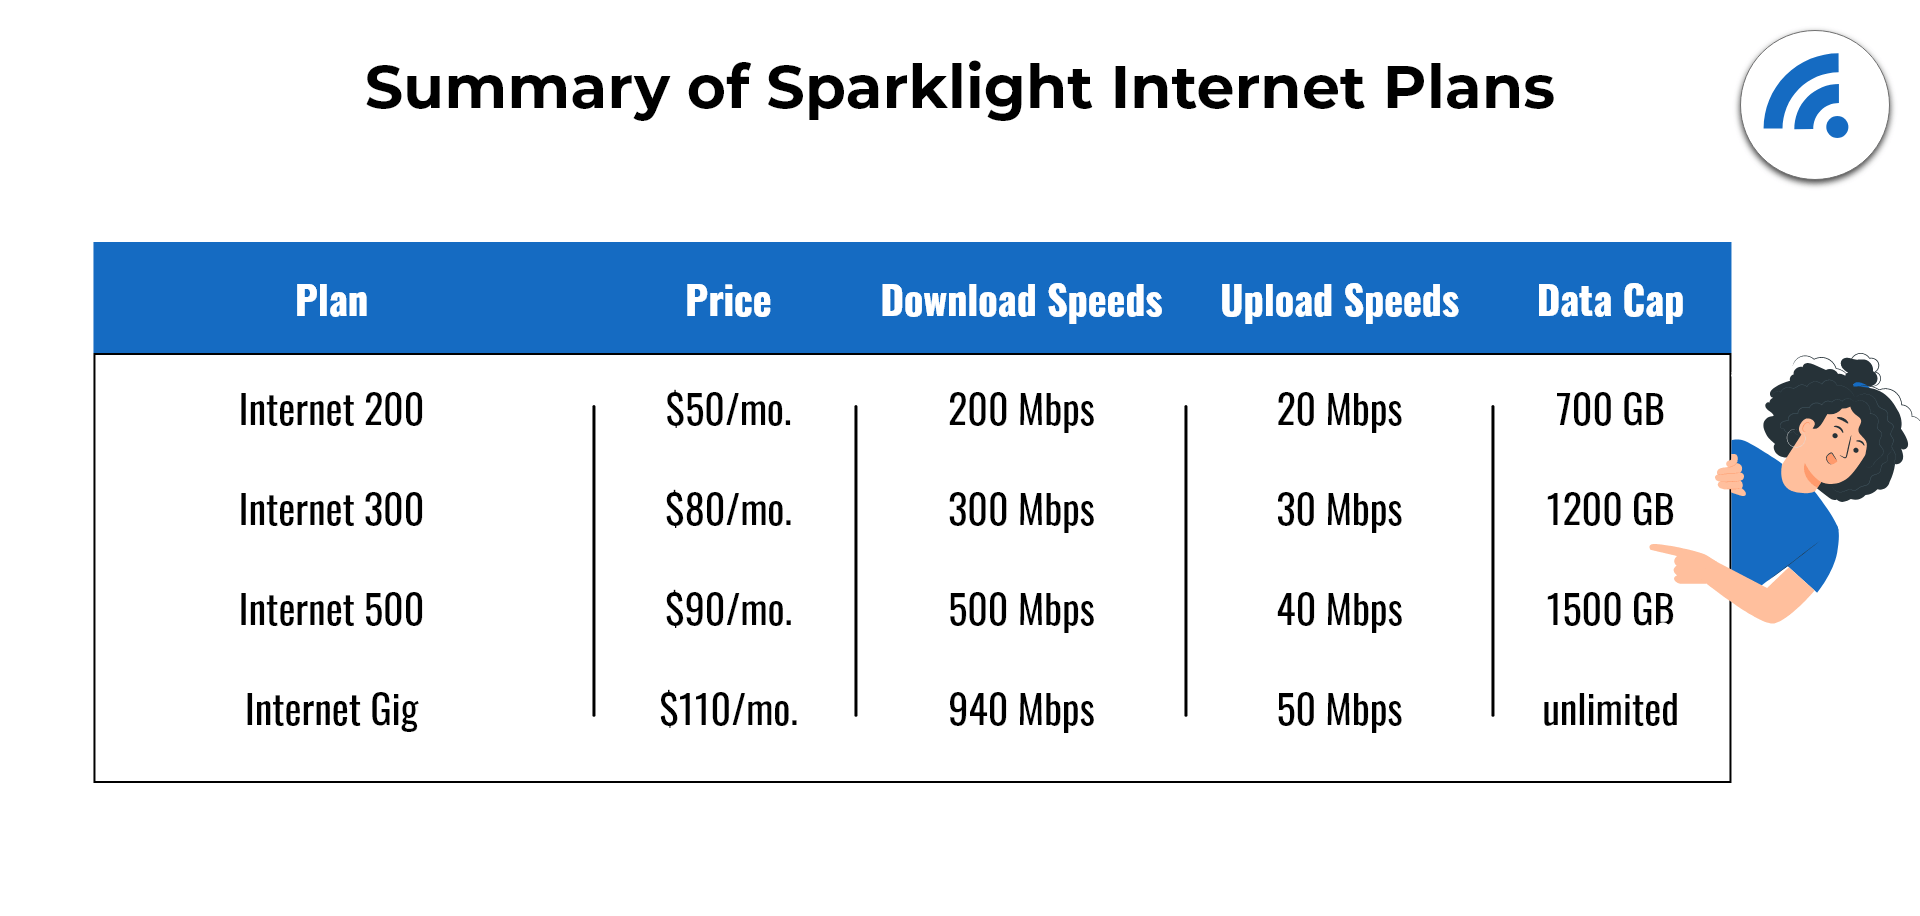 A table of the summary of Sparklight internet plans